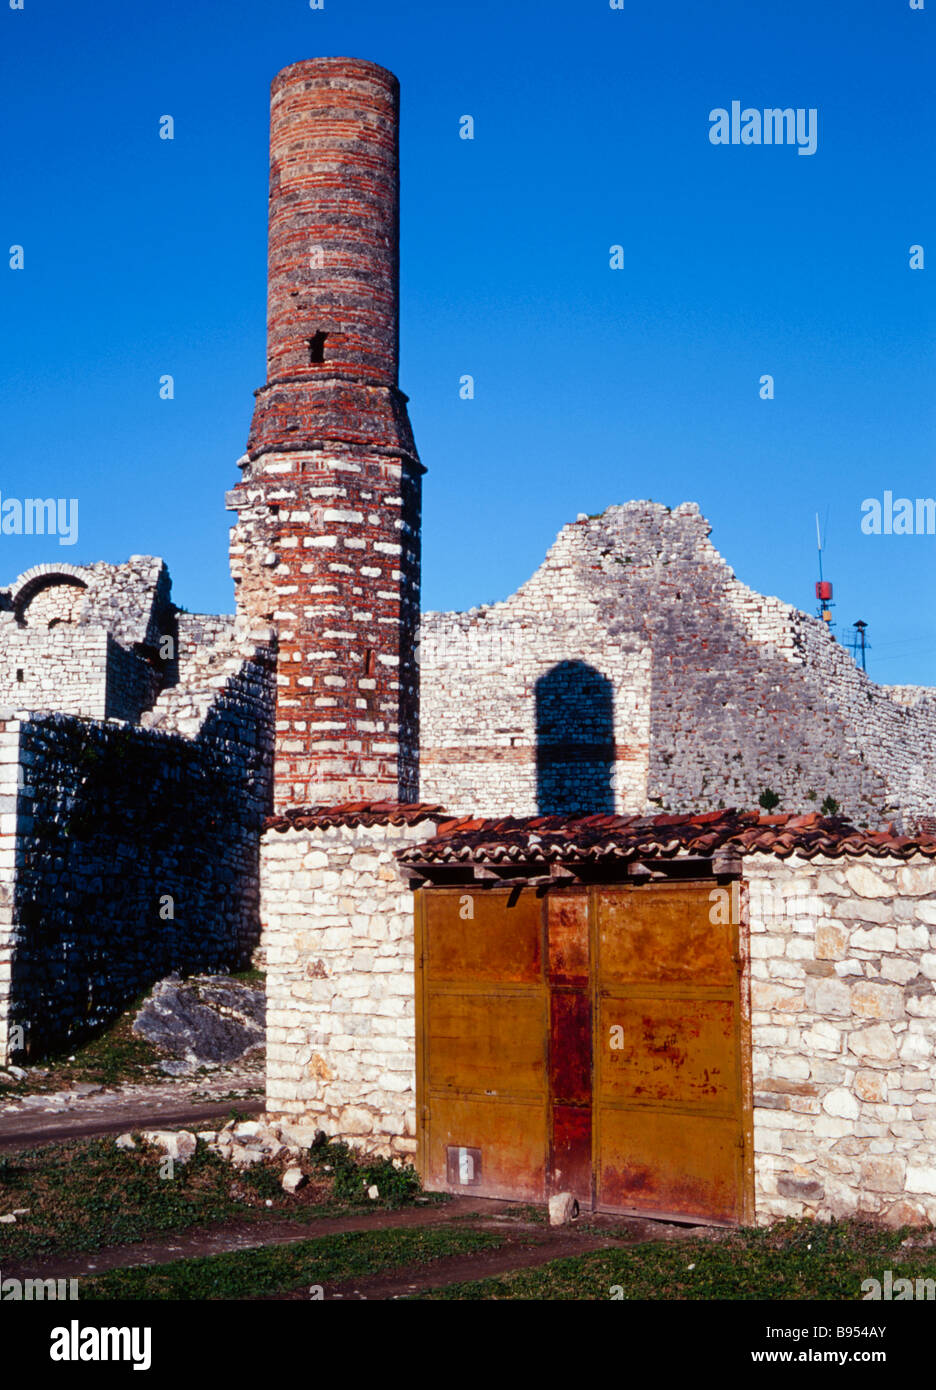 Ruins of the Red Mosque in Berat's citadel, central Albania Stock Photo